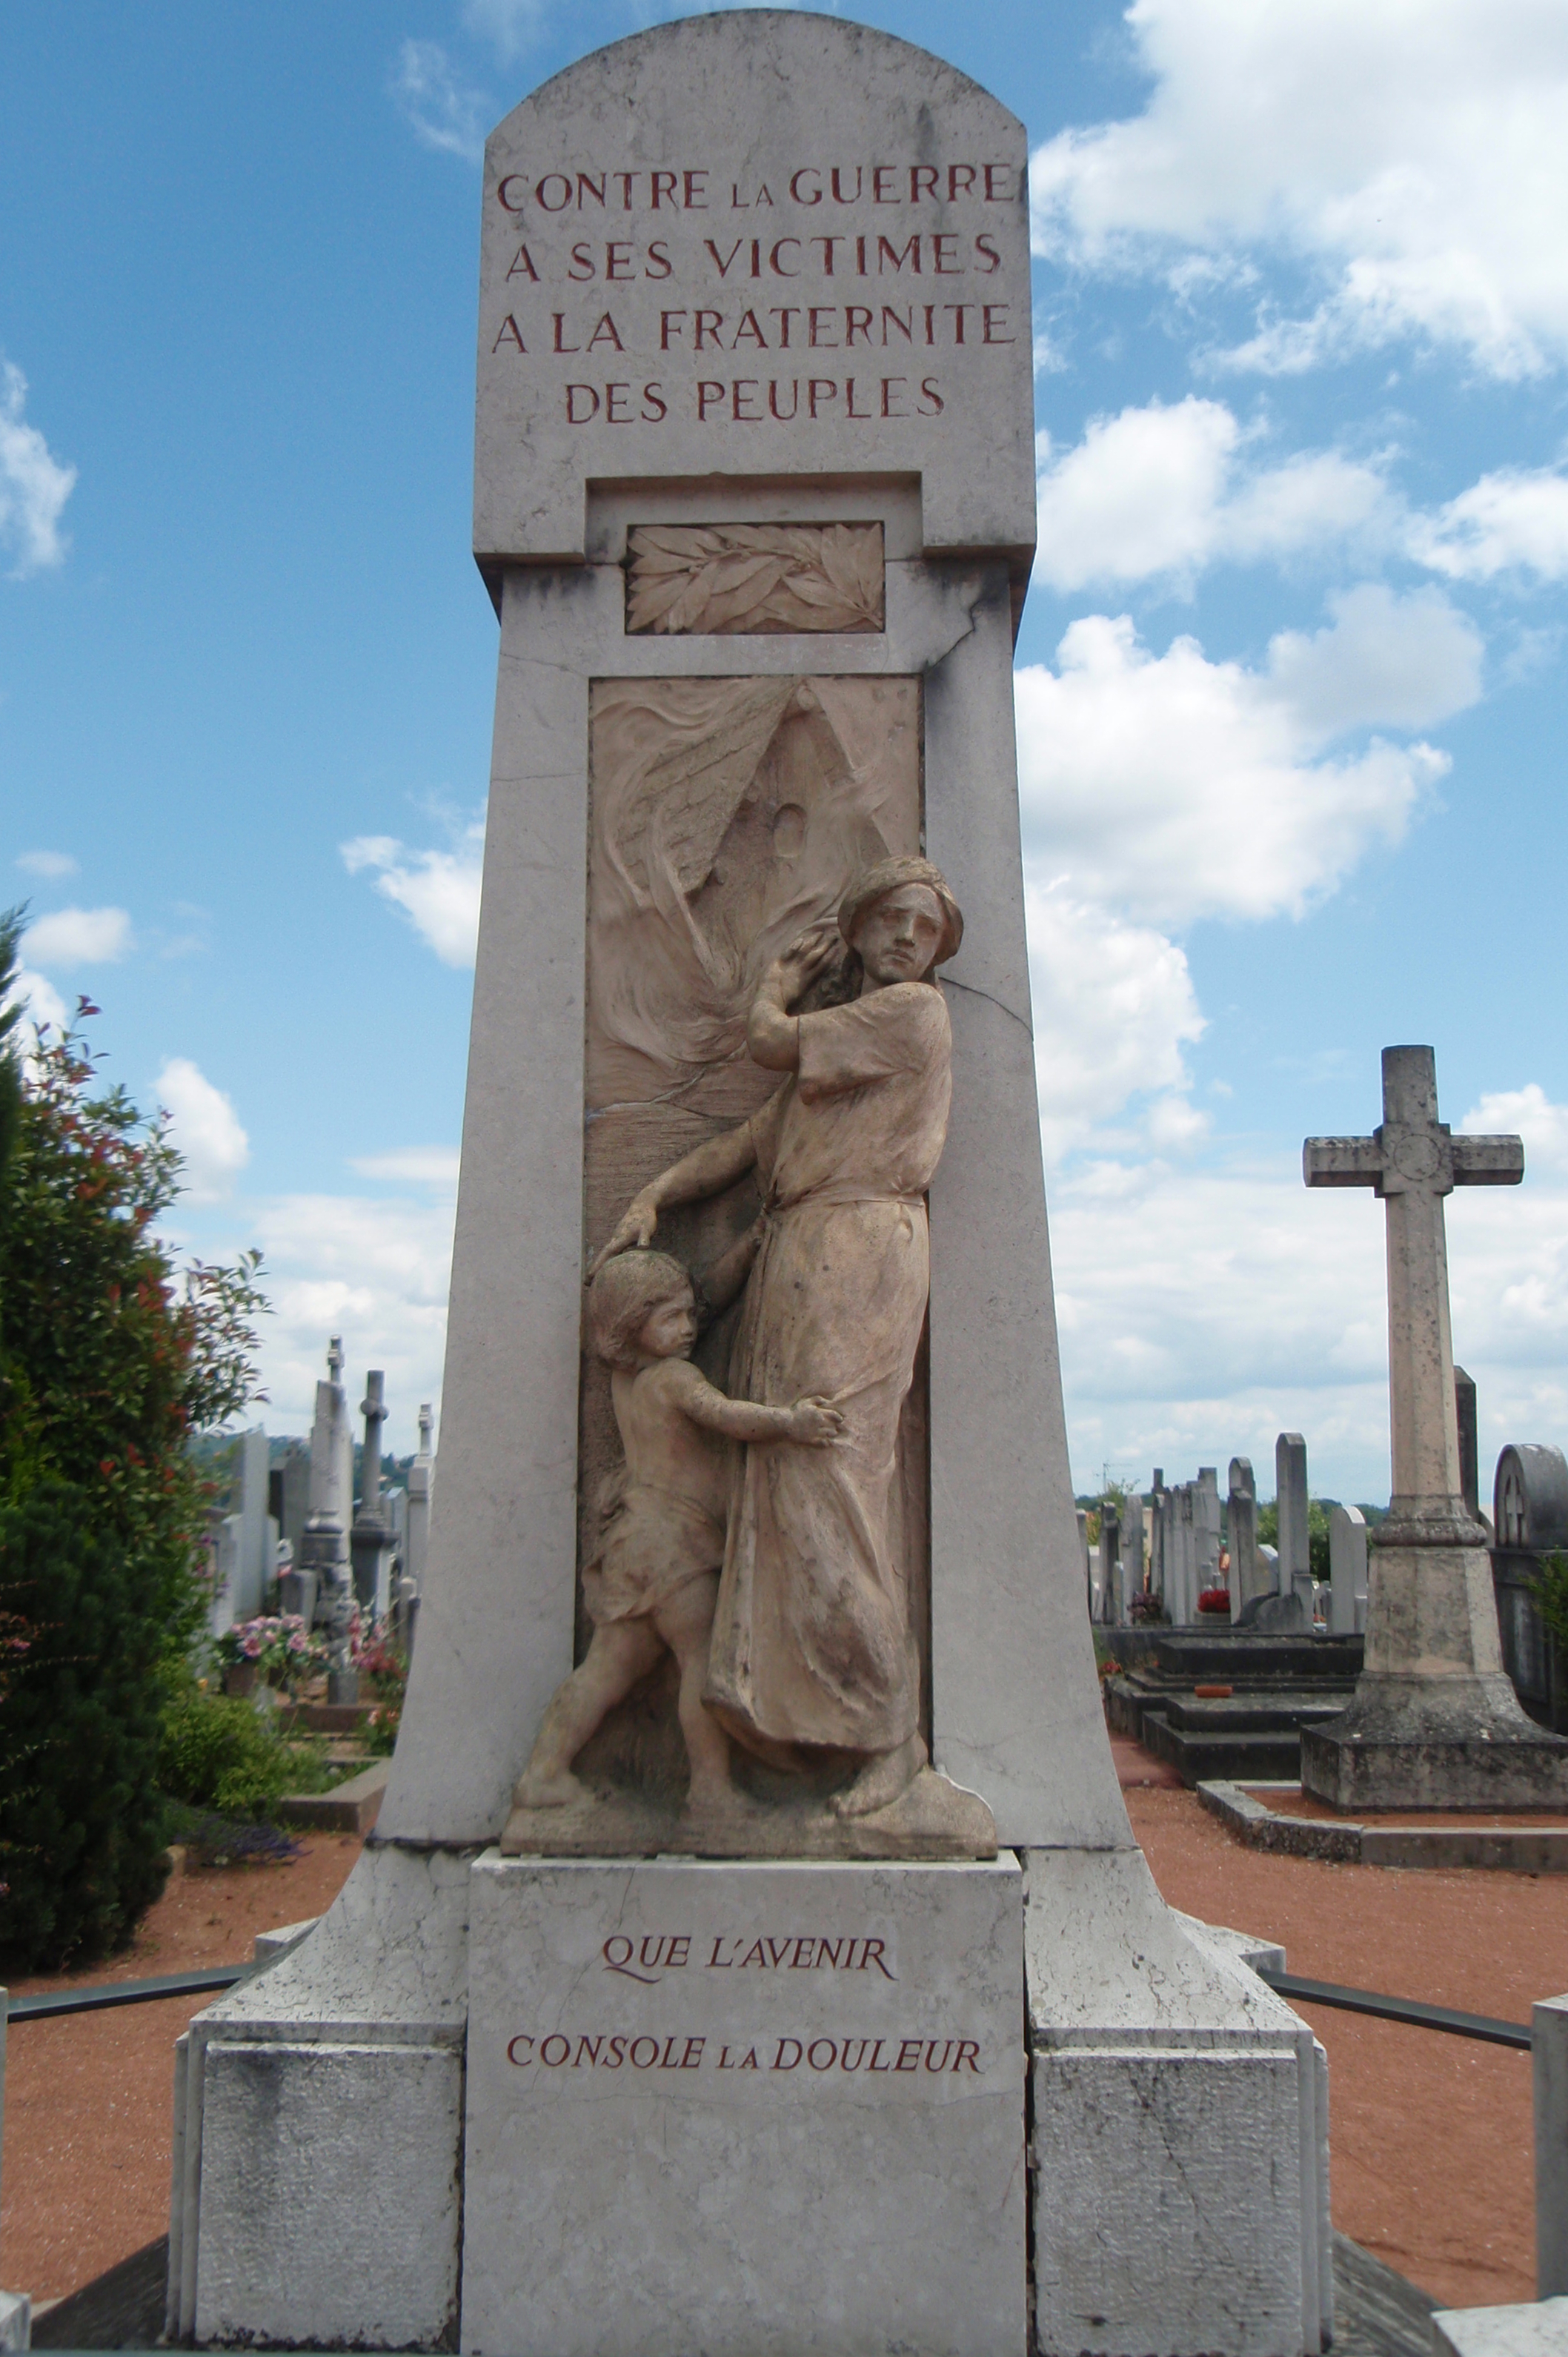 http://upload.wikimedia.org/wikipedia/commons/9/9a/Dardilly,_le_monument_aux_morts_pacifiste.jpg